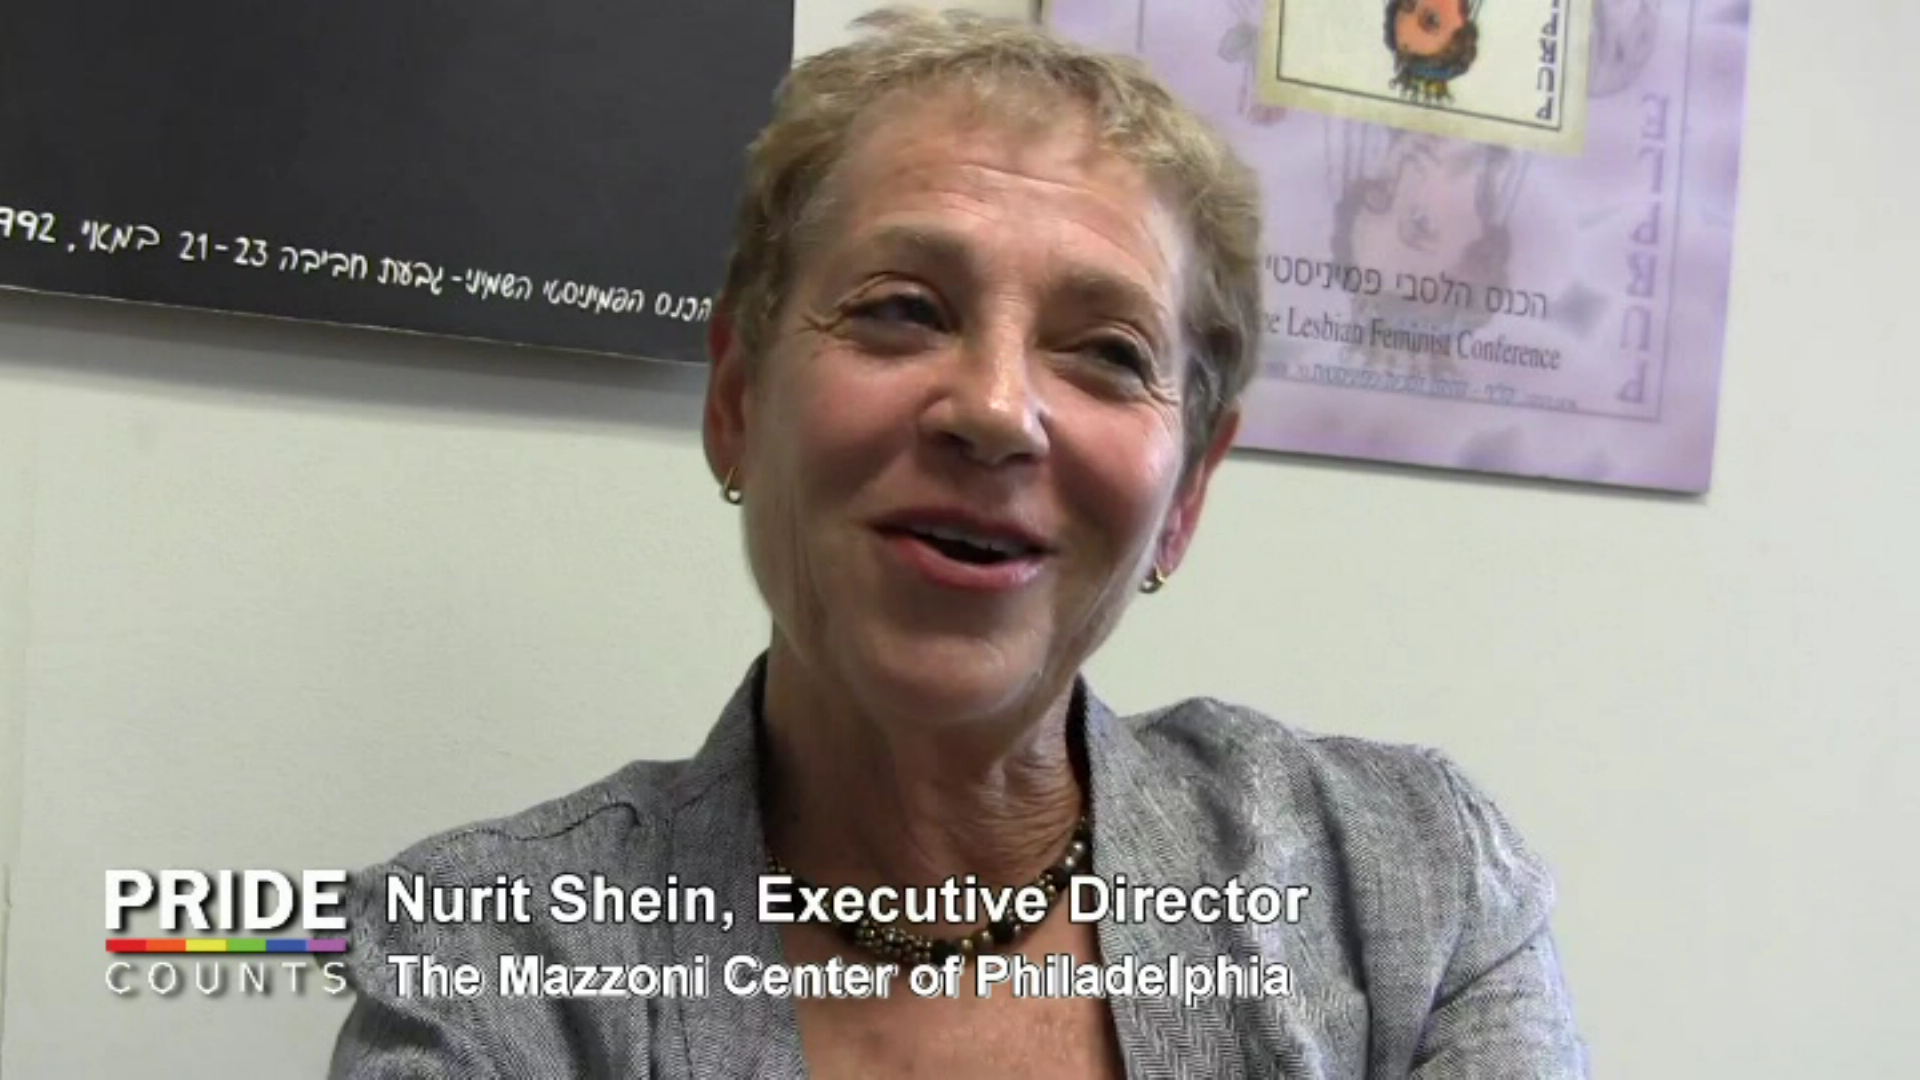 Nurit Shein with Mazzoni Center Supports LGBTQ Philly with Pride – Part 2